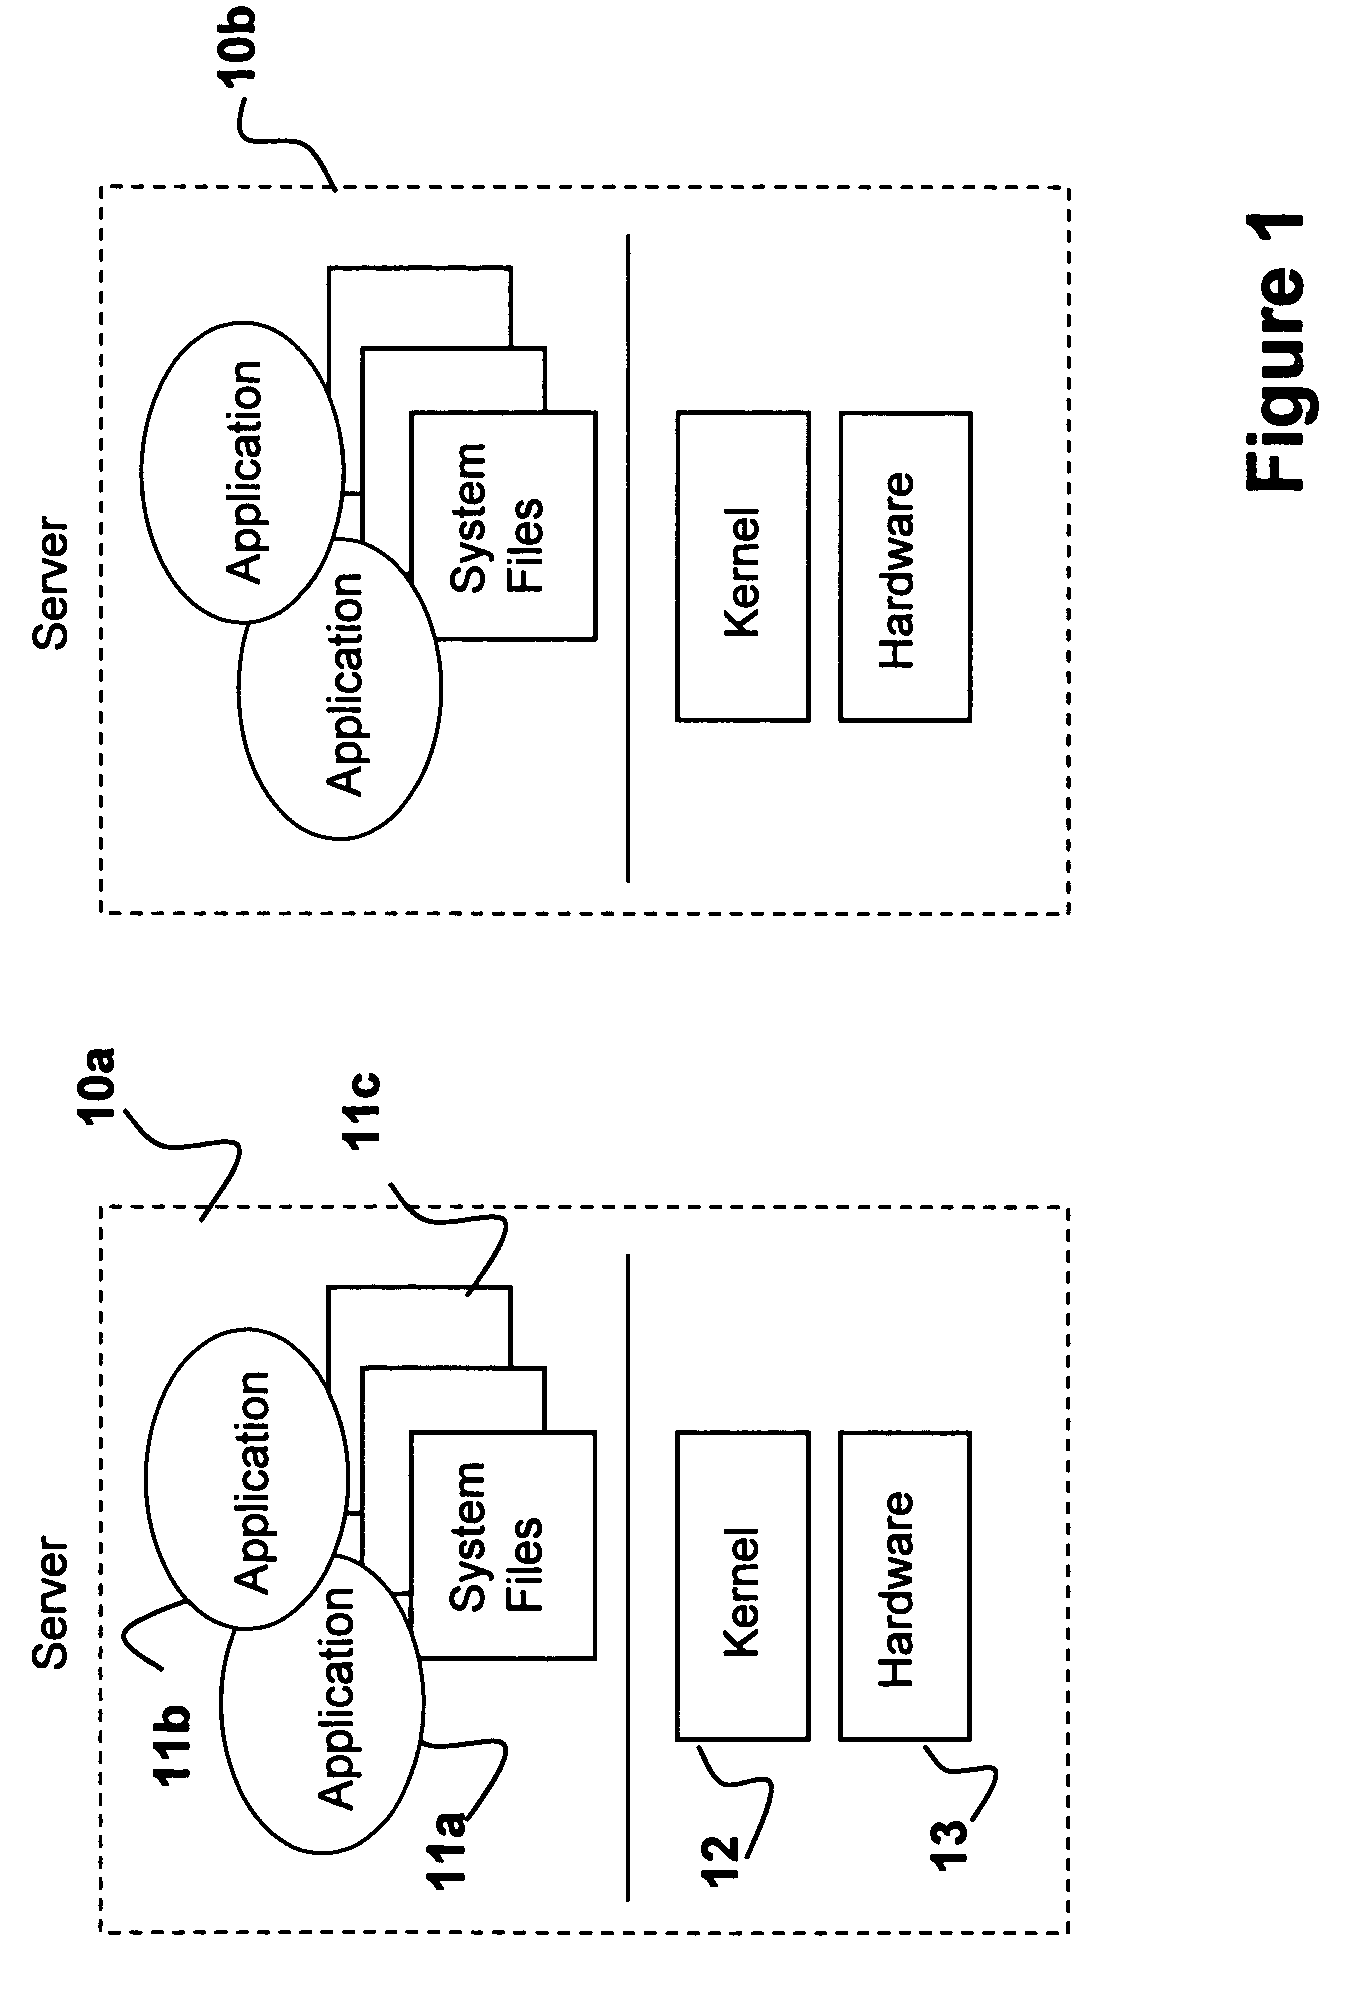 System for containerization of application sets